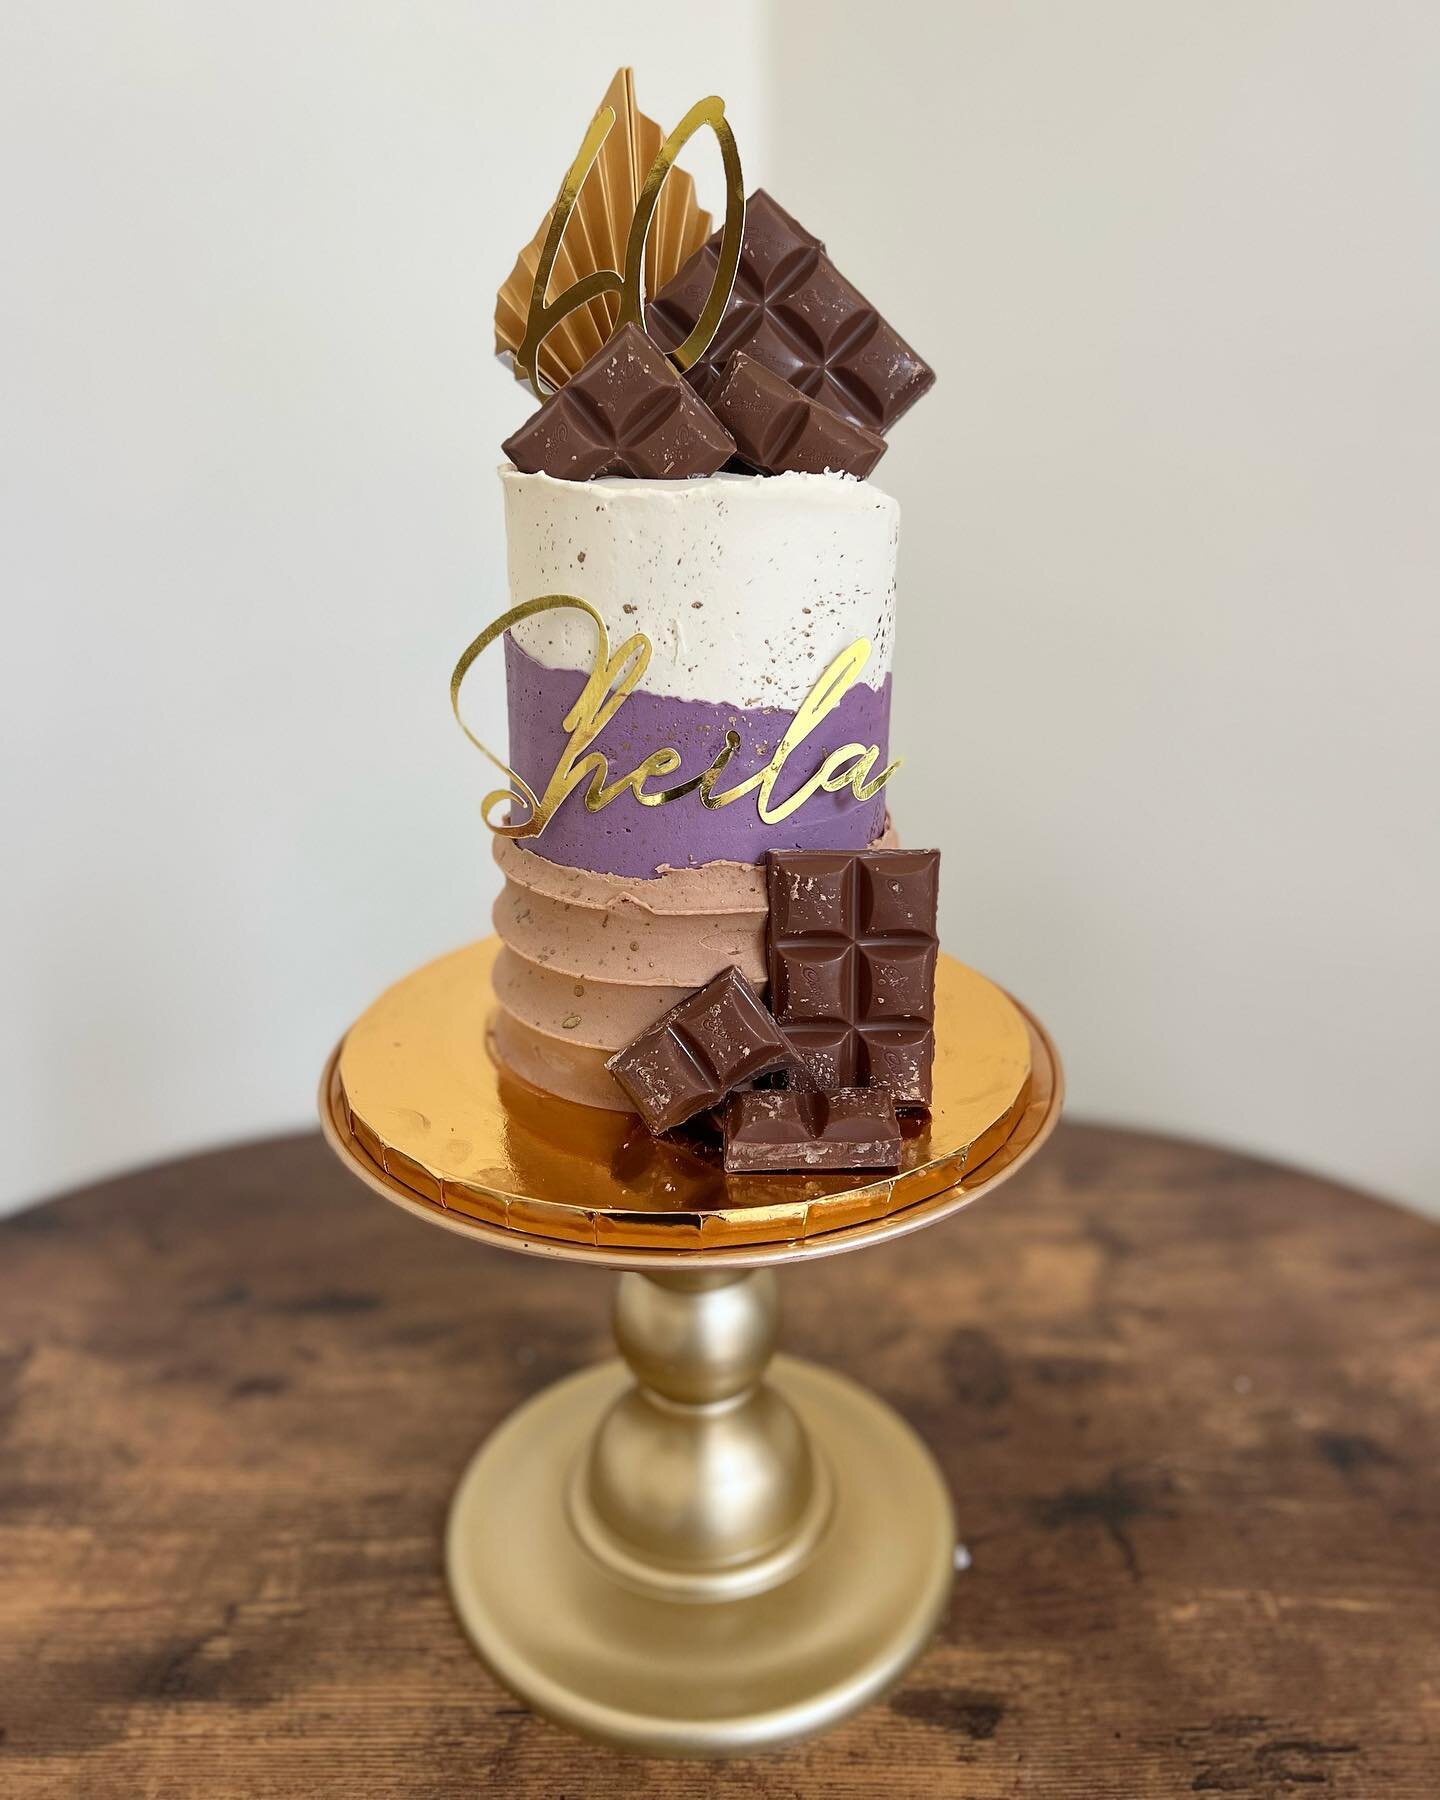 4&rdquo; gluten free coffee cake with dairy milk buttercream for this Cadbury&rsquo;s themed 60th 💜 

I live for creative freedom ✨

All messages and enquiries will be replied to today, my diary is very full so if you are after a cake then get in to